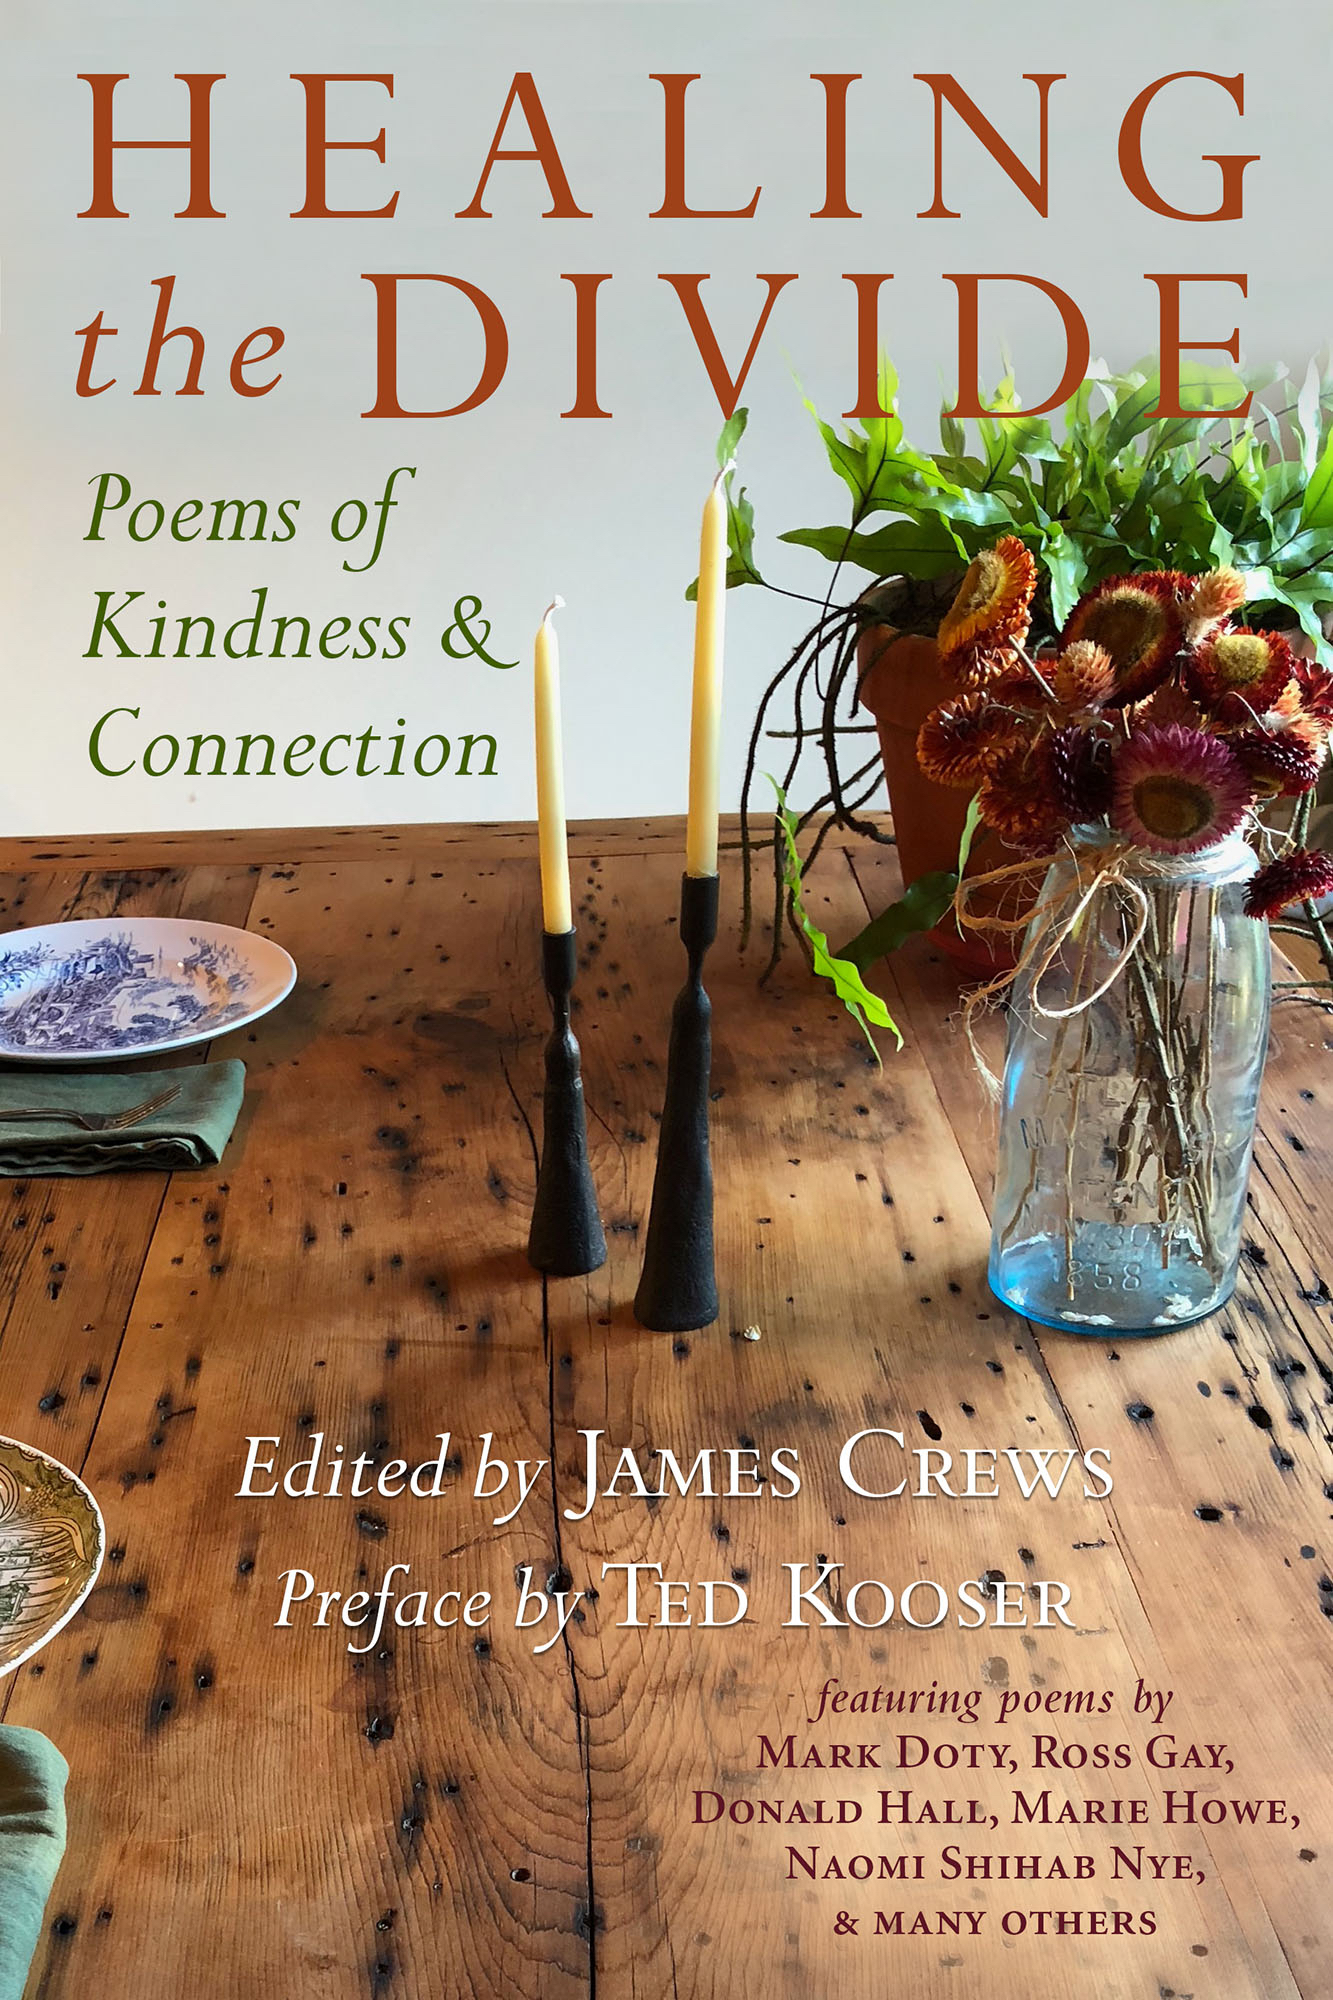   Healing the Divide , edited by James Crews   (Green Writers Press) 